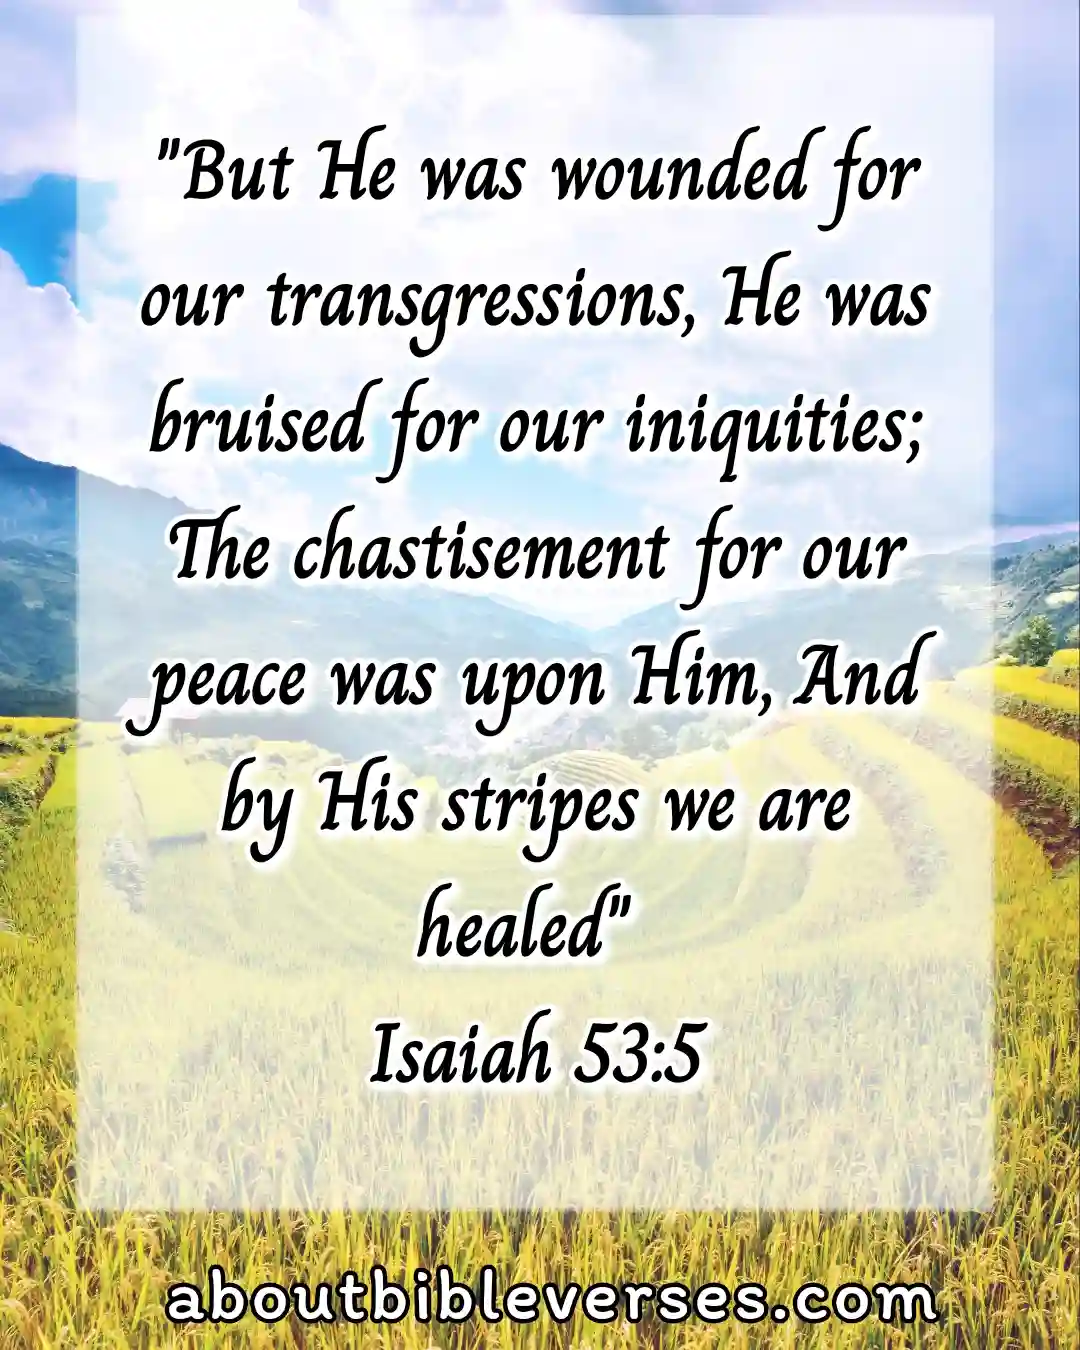 Bible Verses About Emotional Pain And Healing (Isaiah 53:5)